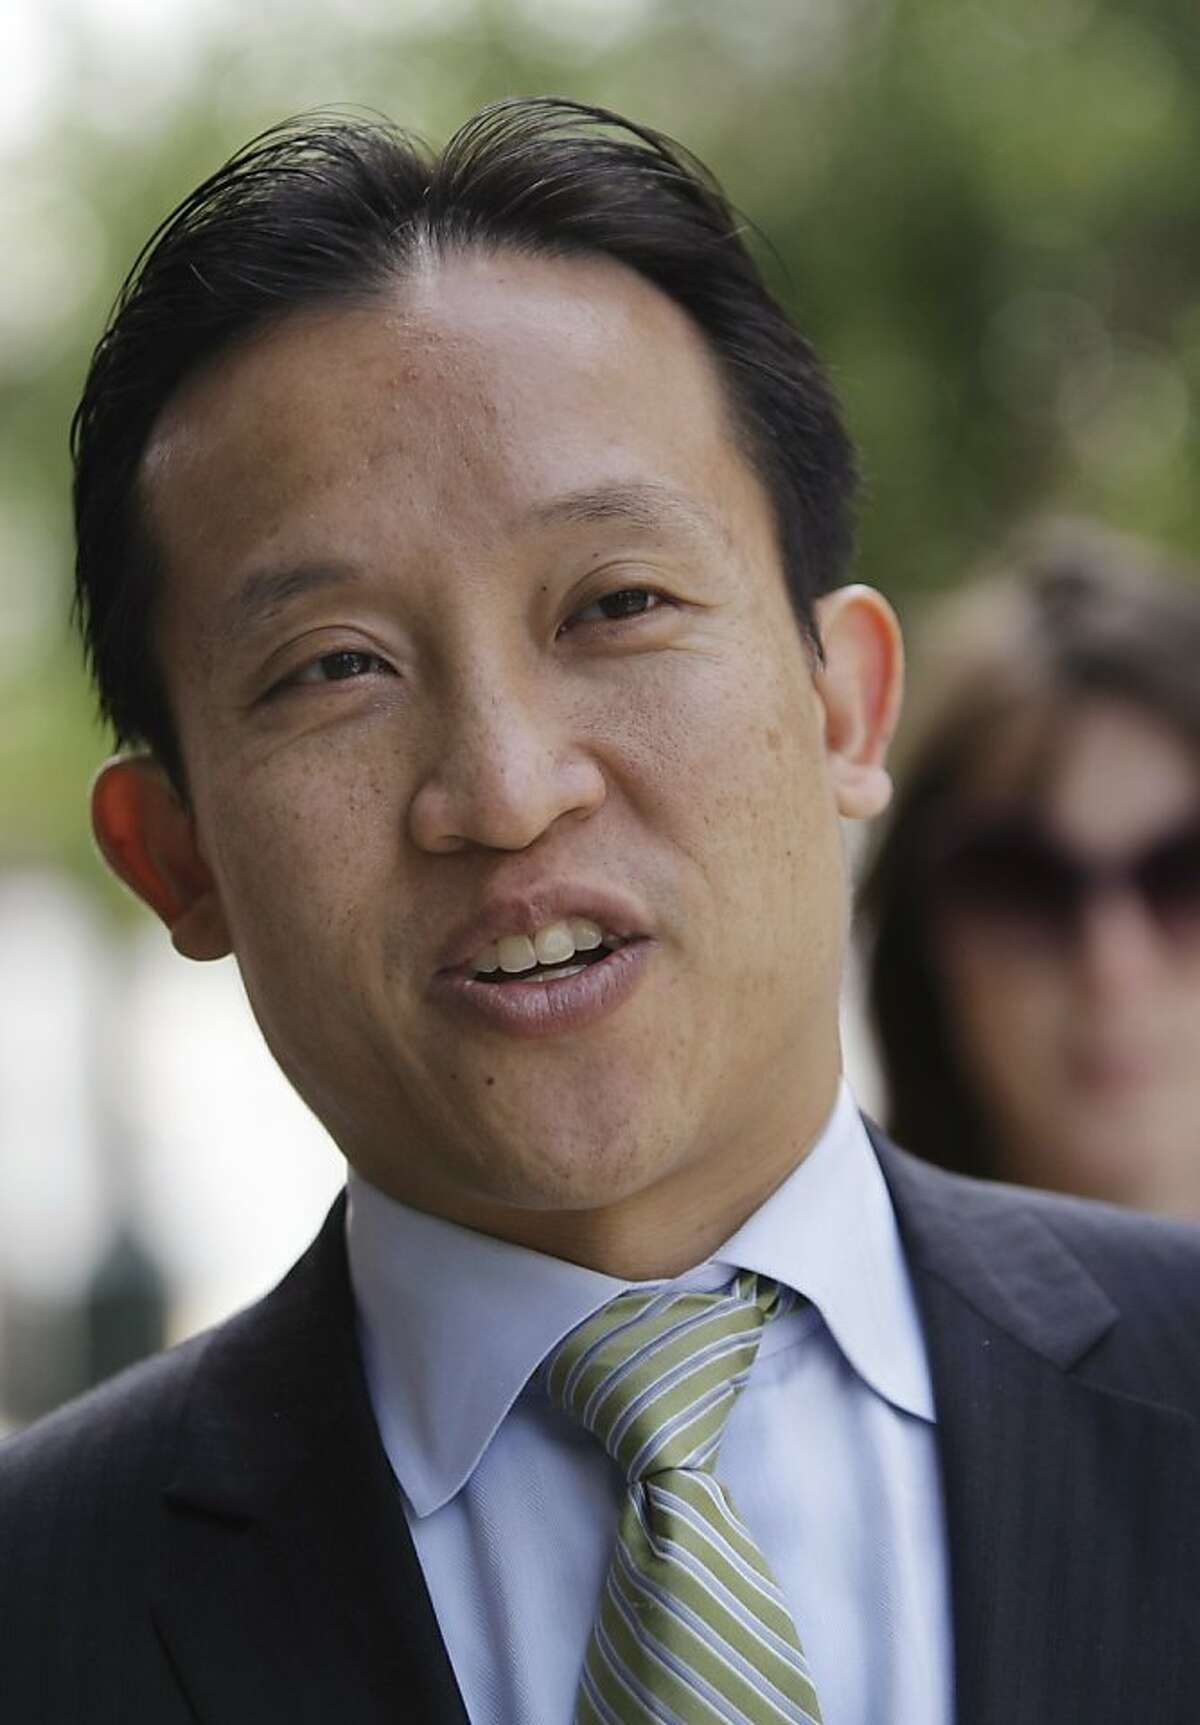 FiLE PHOTO: California Assemblyman David Chiu, D-SF, proposed a bill on Thursday that would allow transgender and nonbinary public college students to use their preferred names instead of their birth names on diplomas.